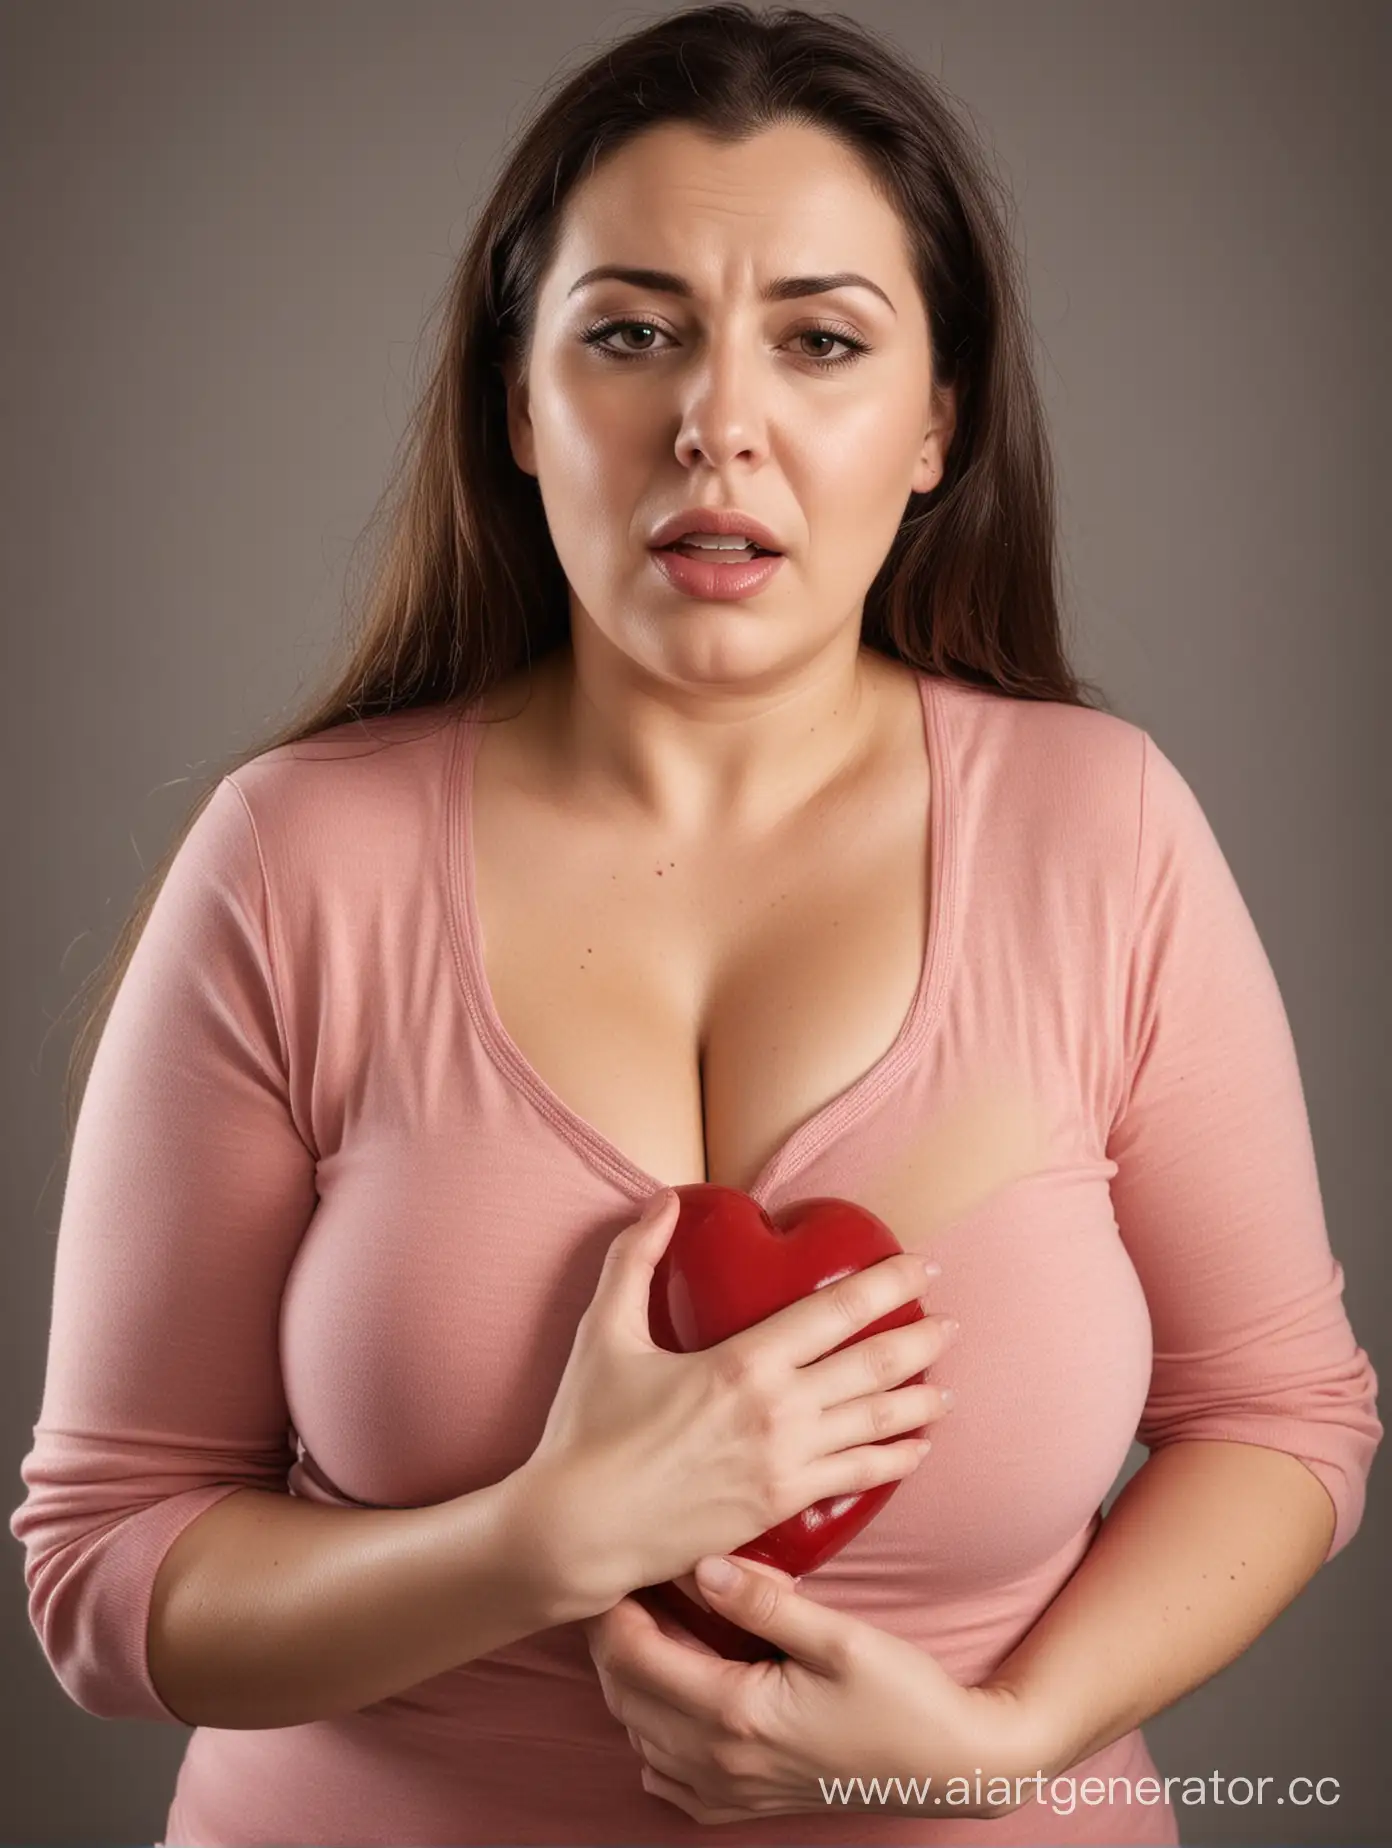 very thick beautyfull woman suffering a heart attack